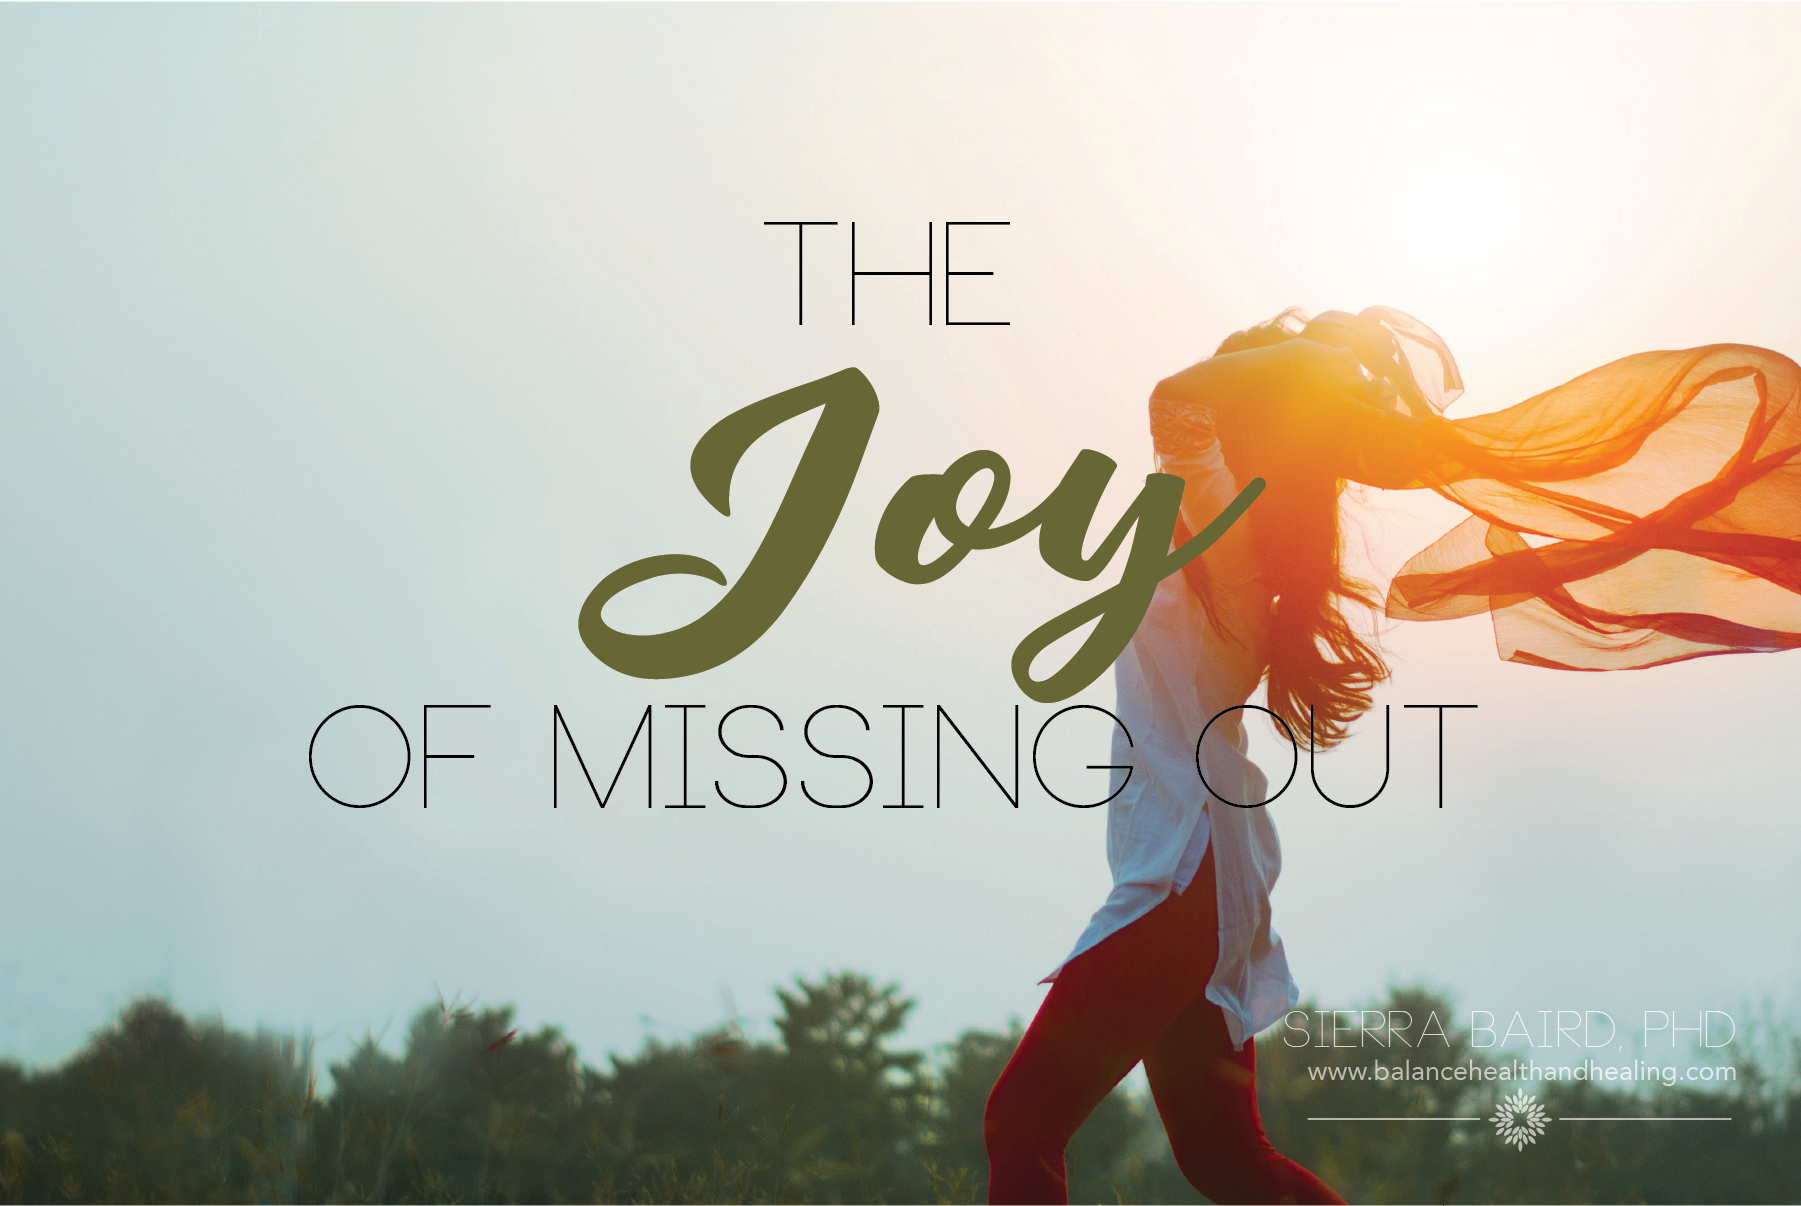 JOMO: The Joy of Missing Out